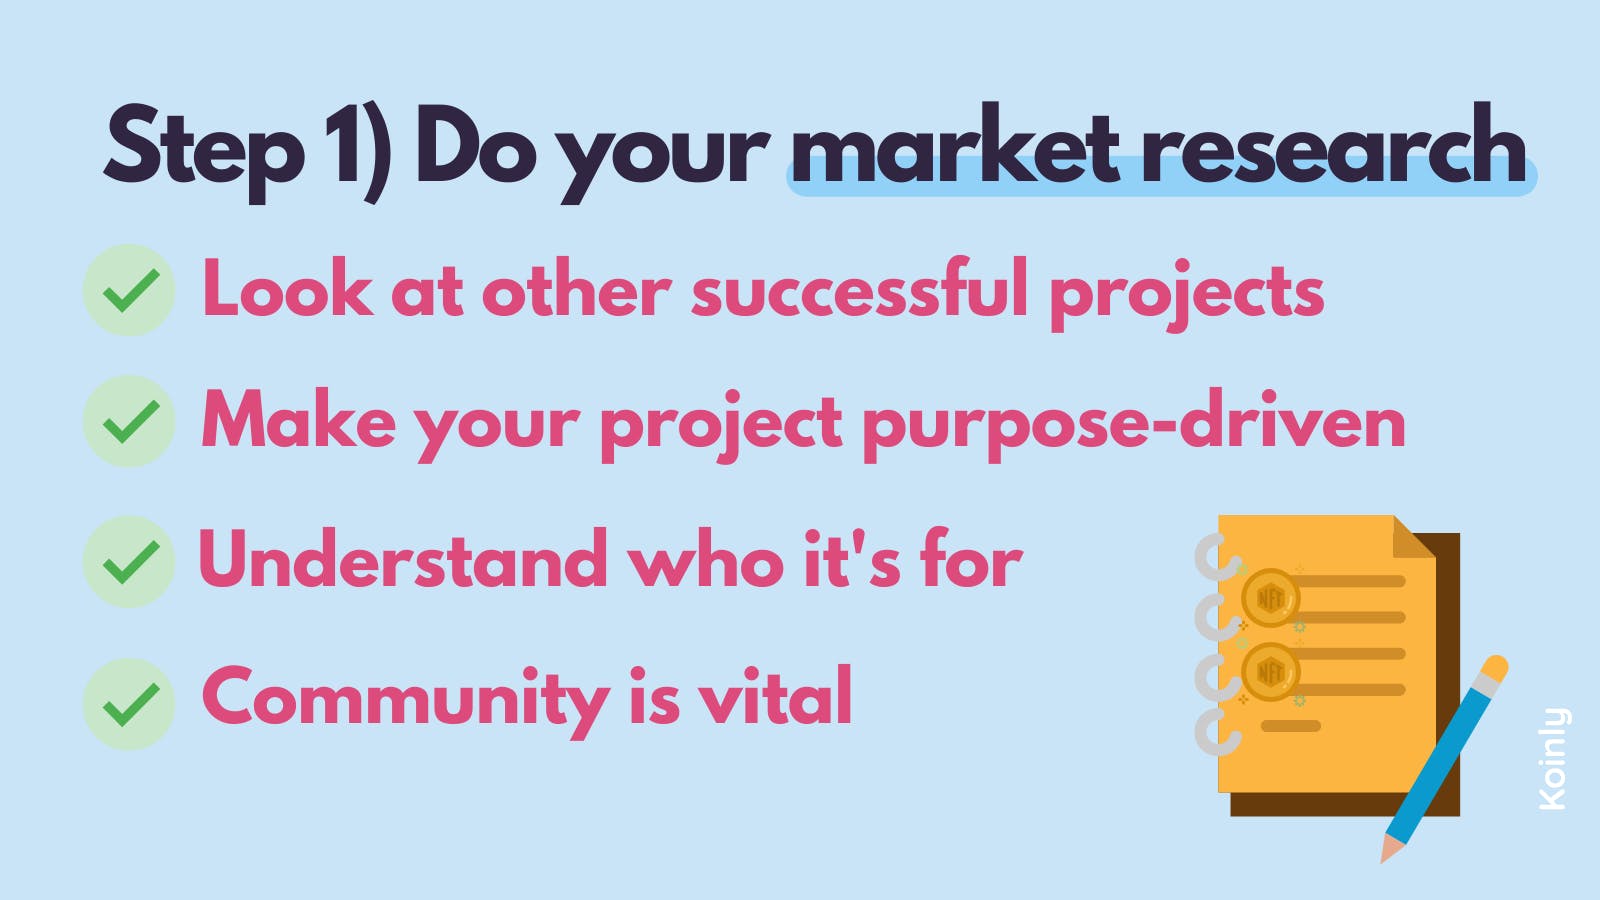 NFT market research tips